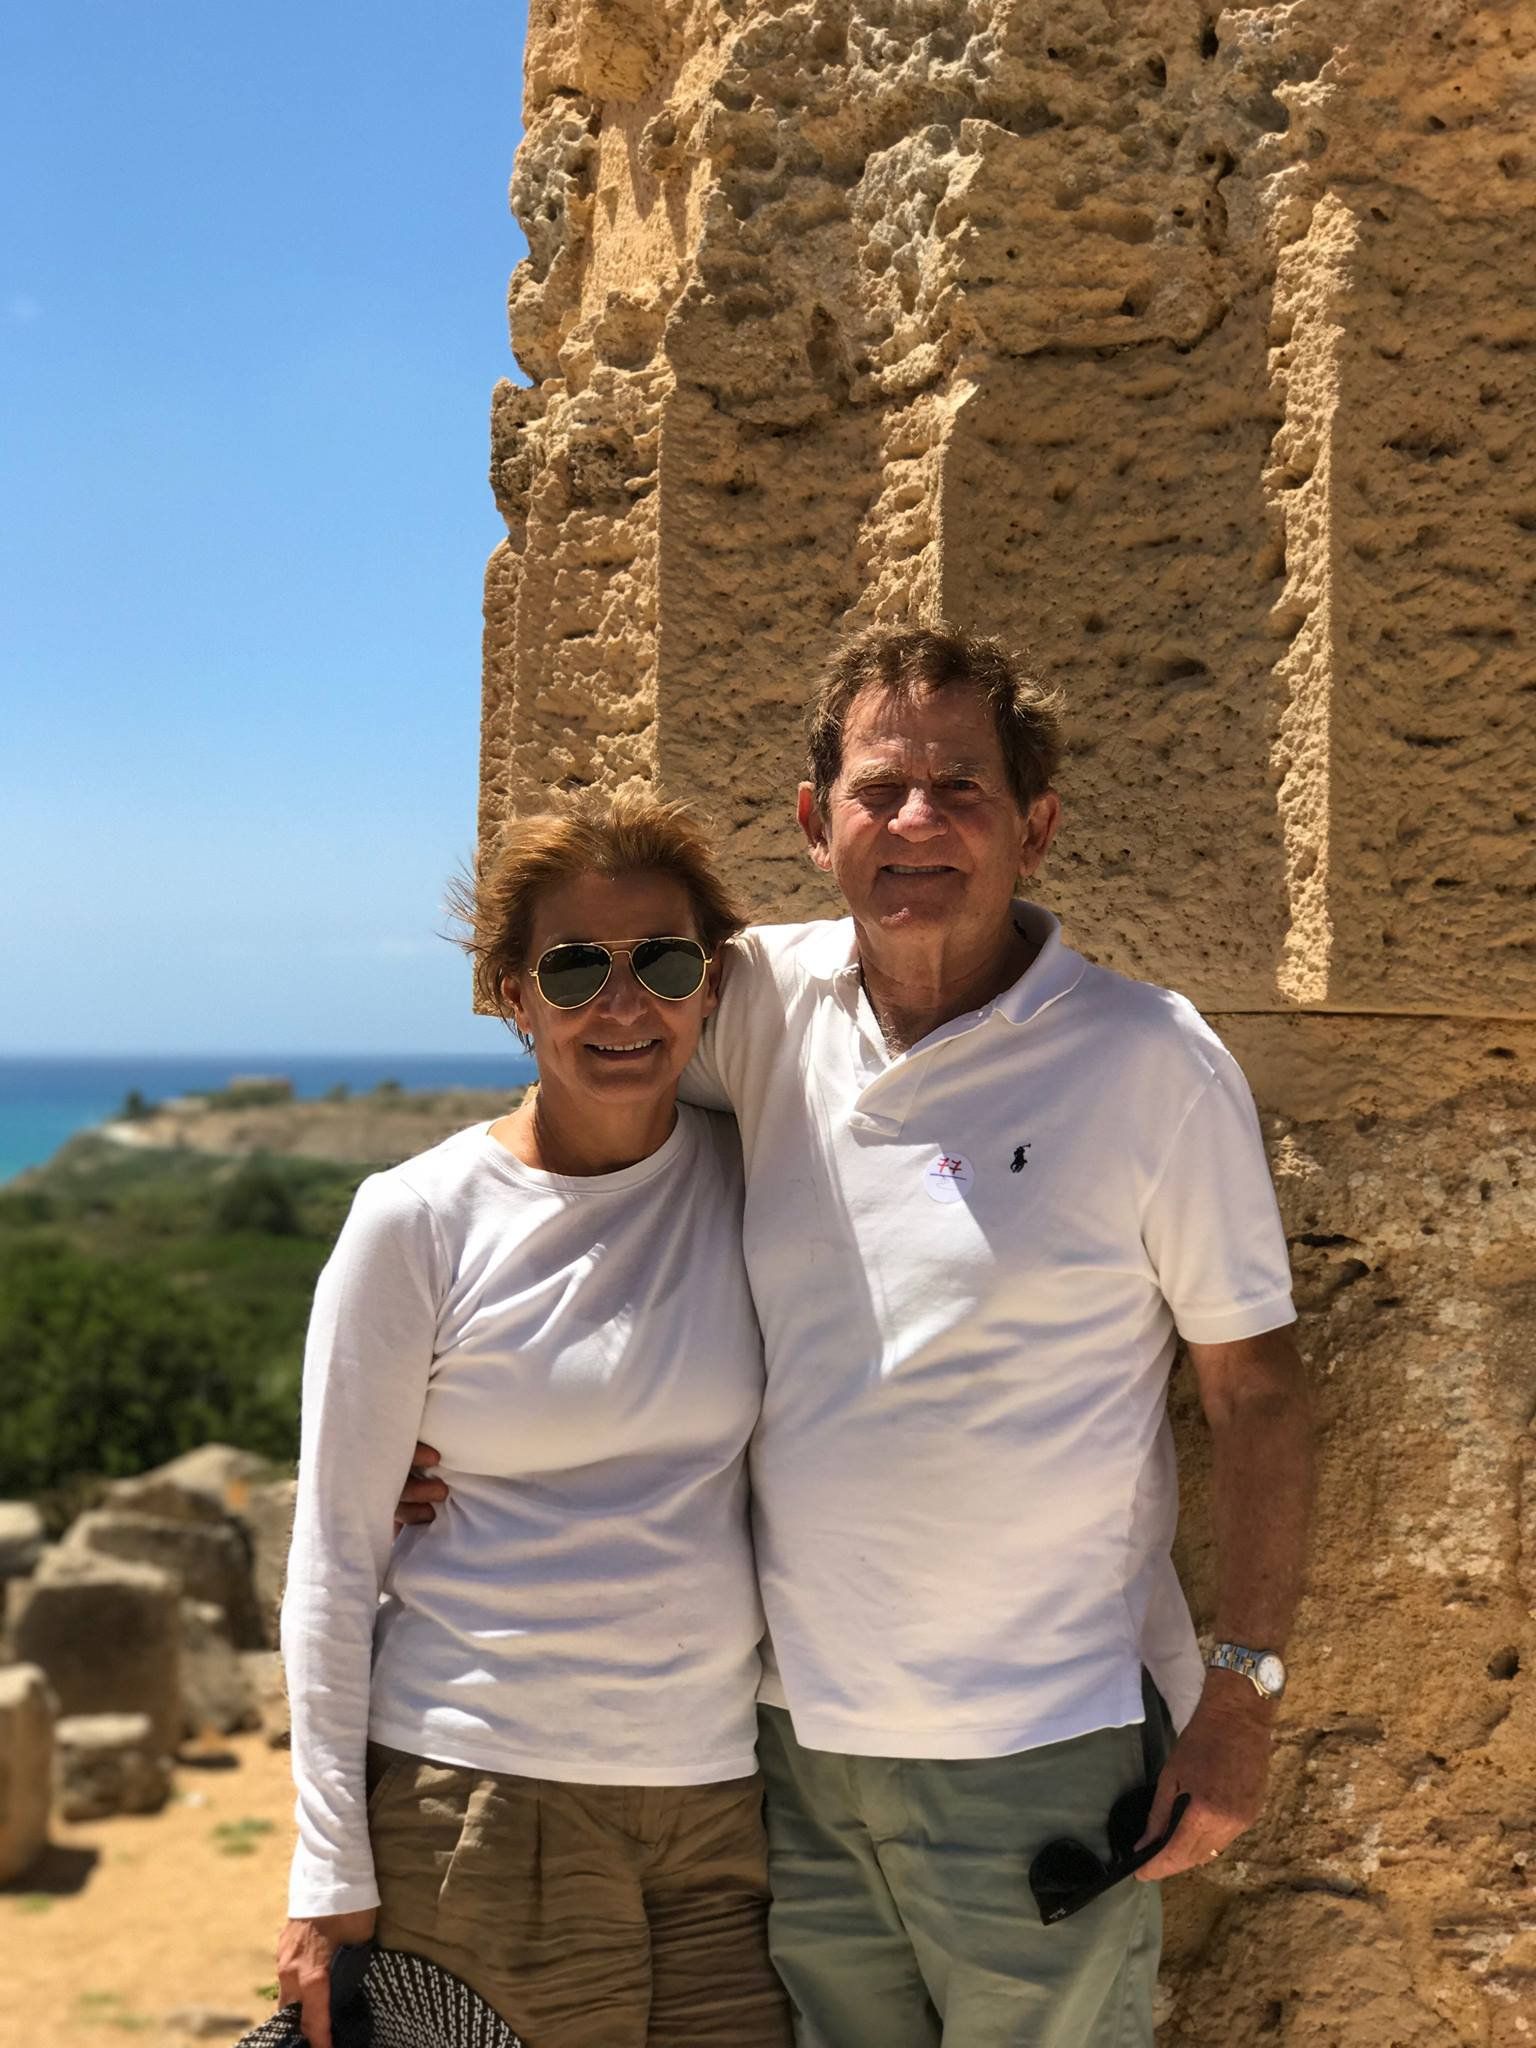 Fran & Michael's personalized trip to Sicily